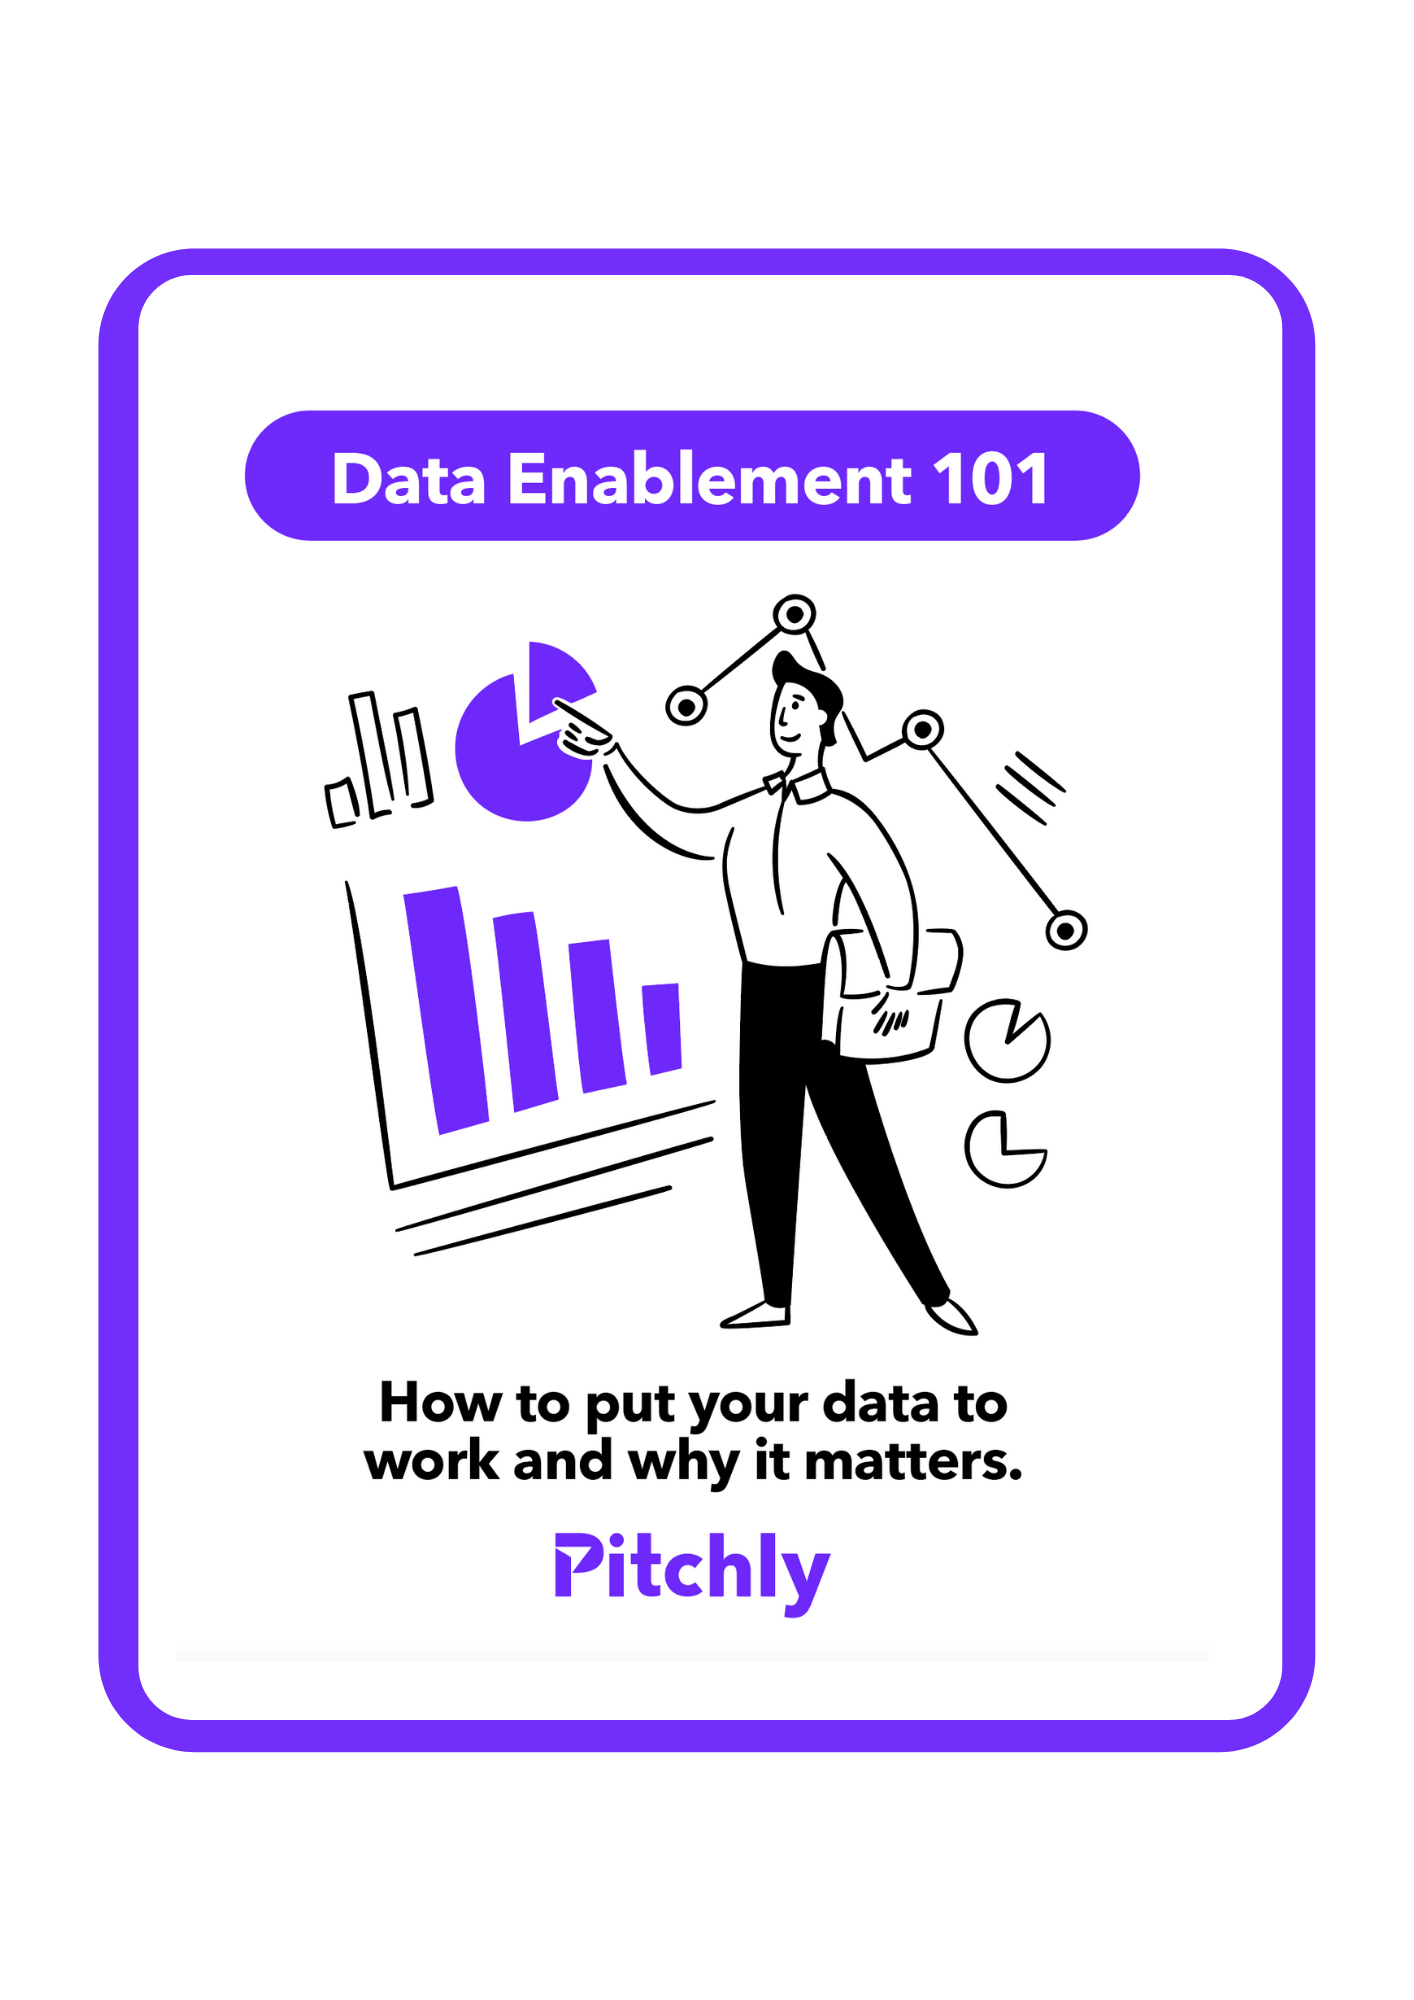 Data Enablement 101 Layout